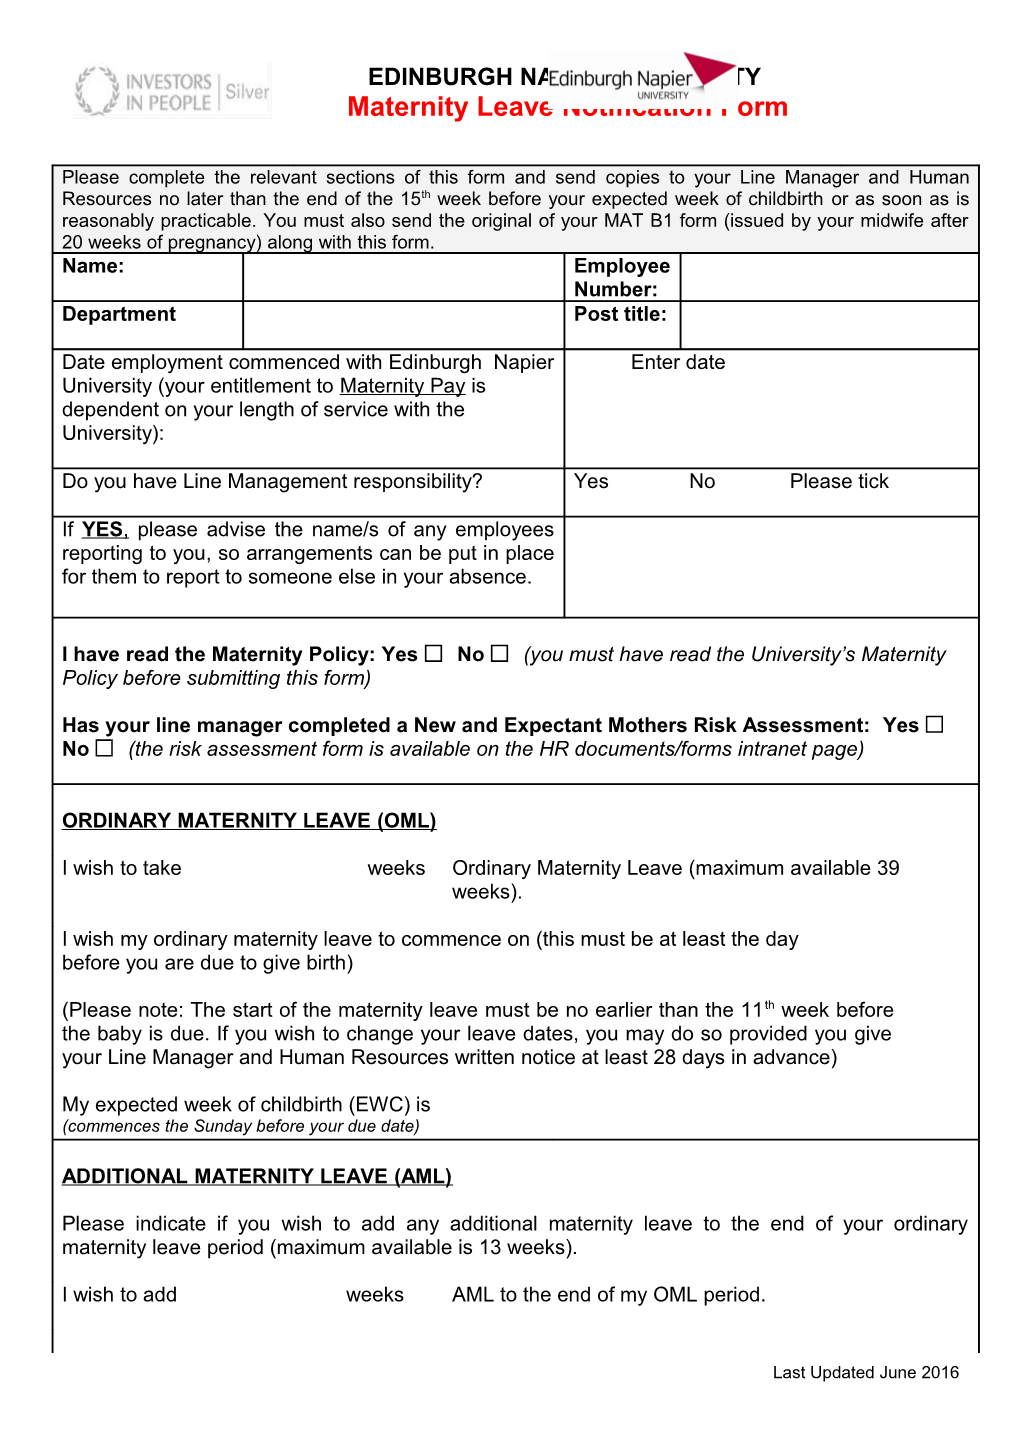 Maternity Leave Notification Form